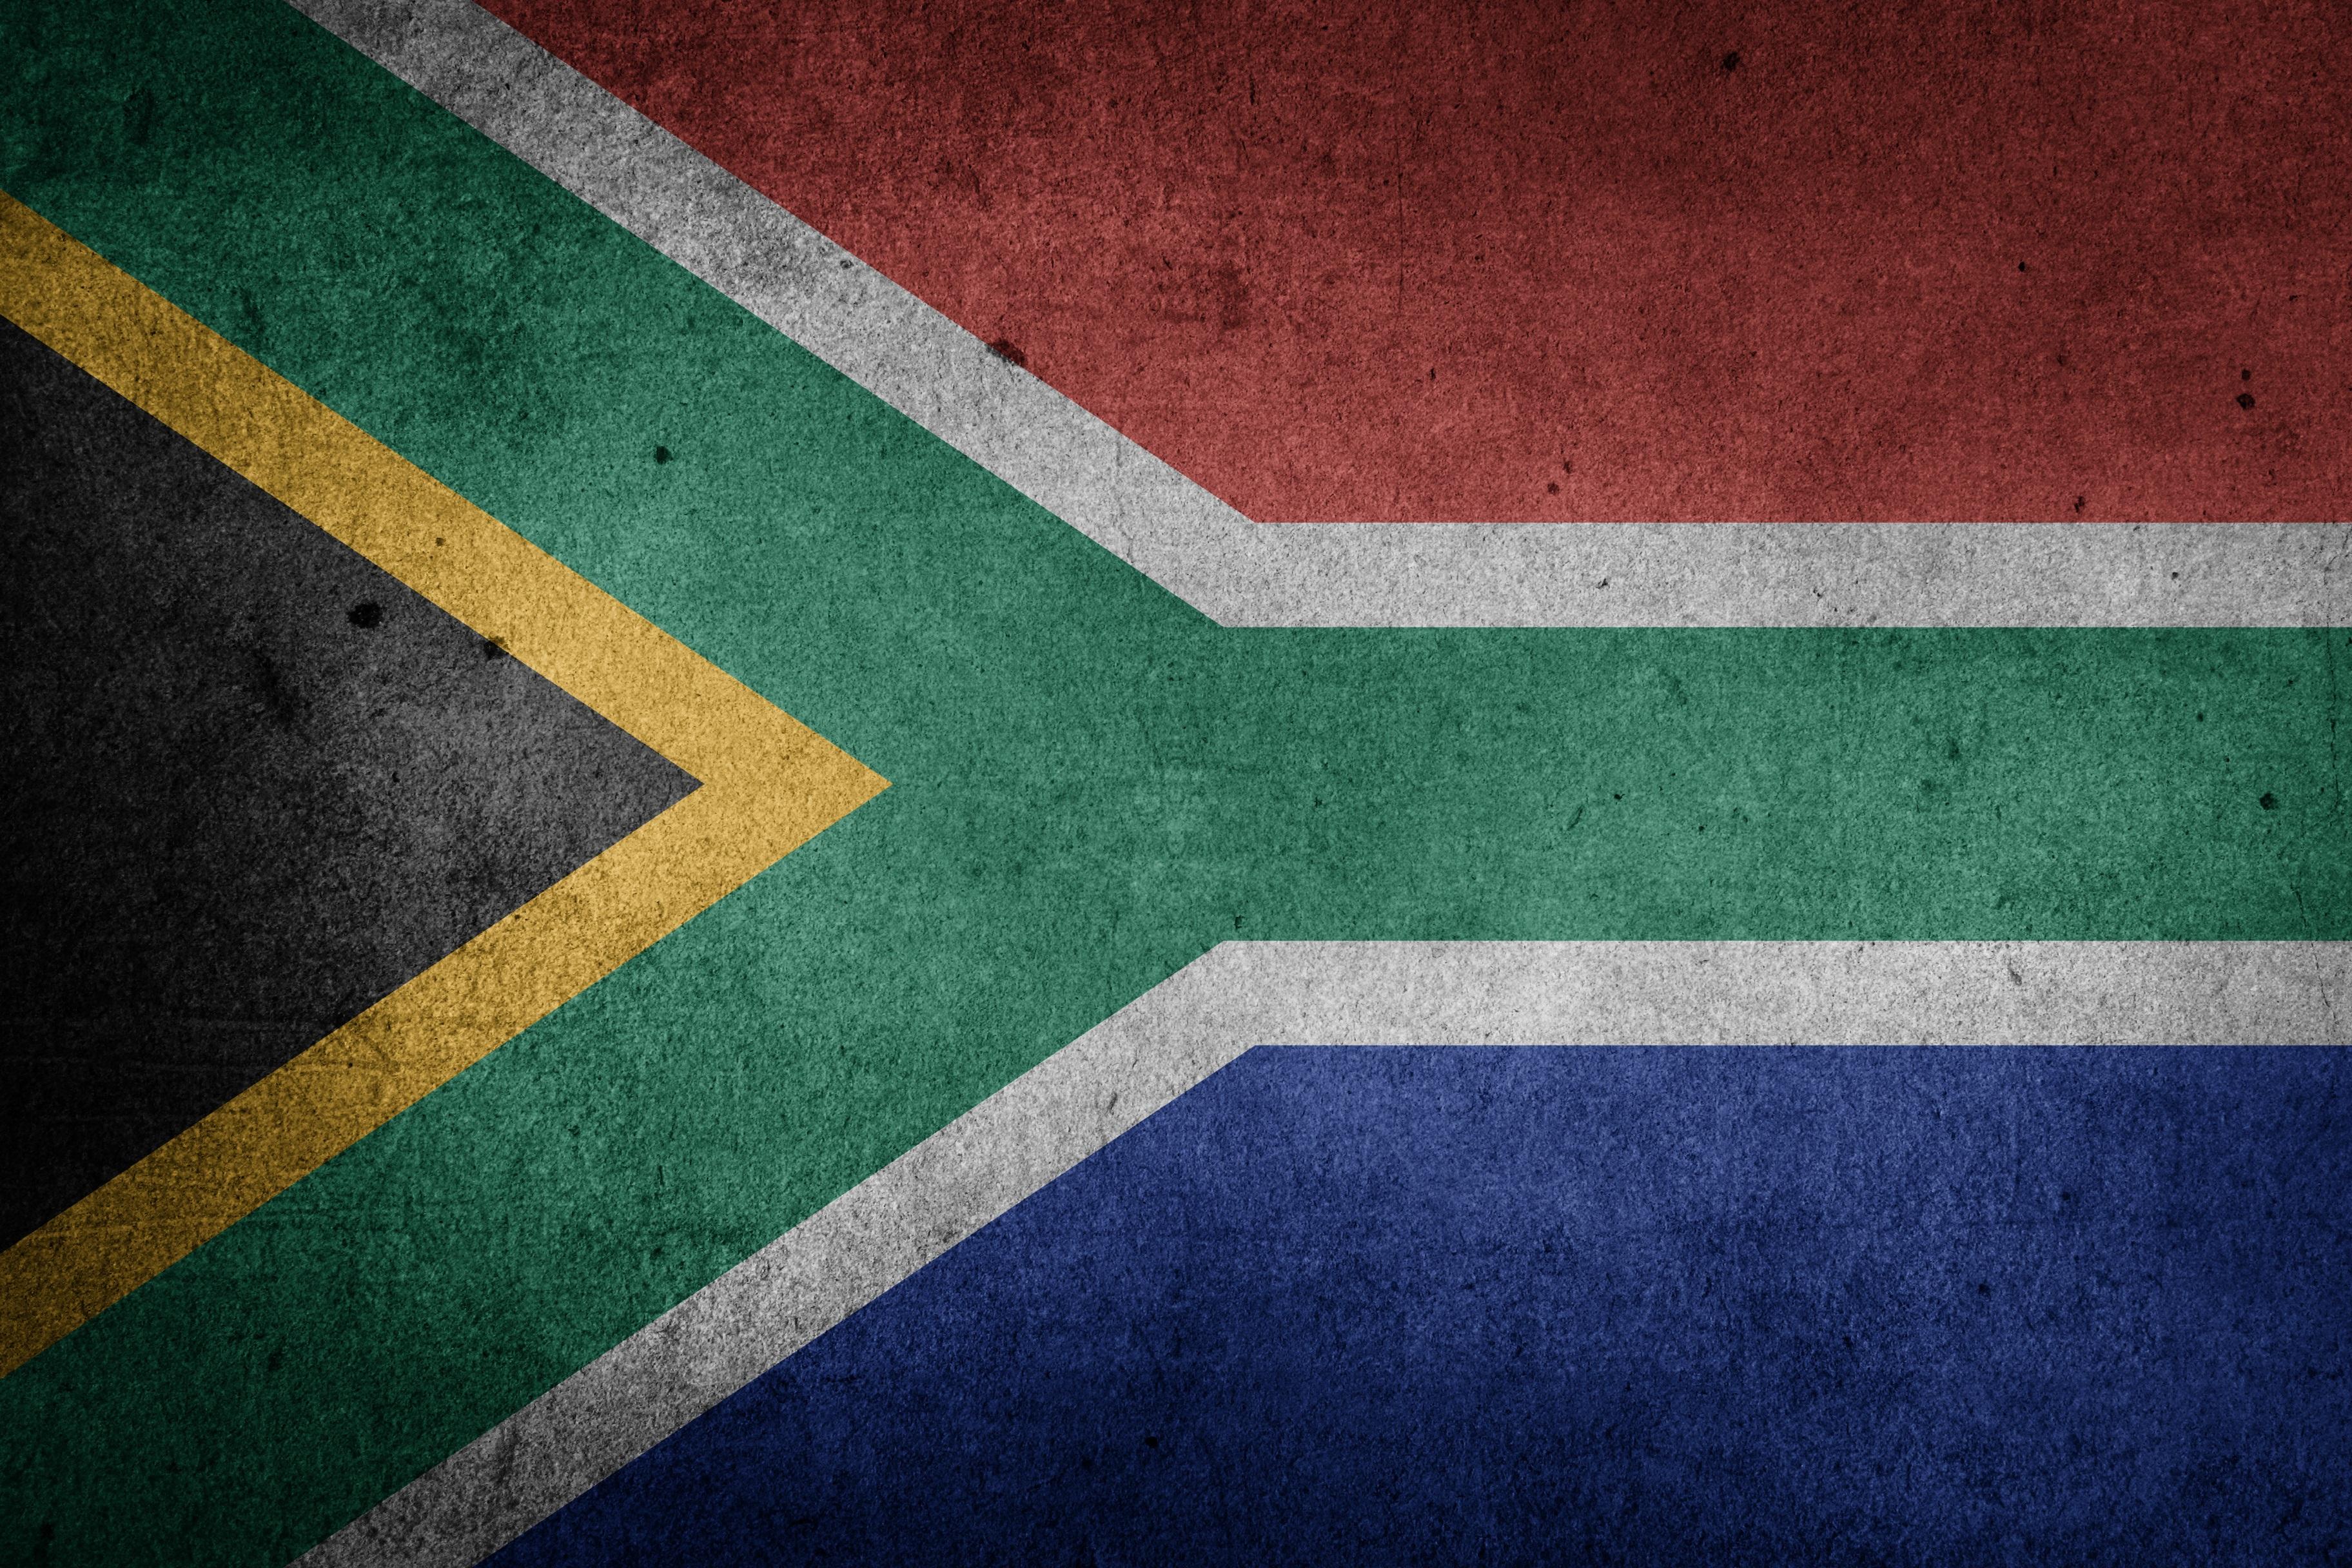 The Flag of South Africa